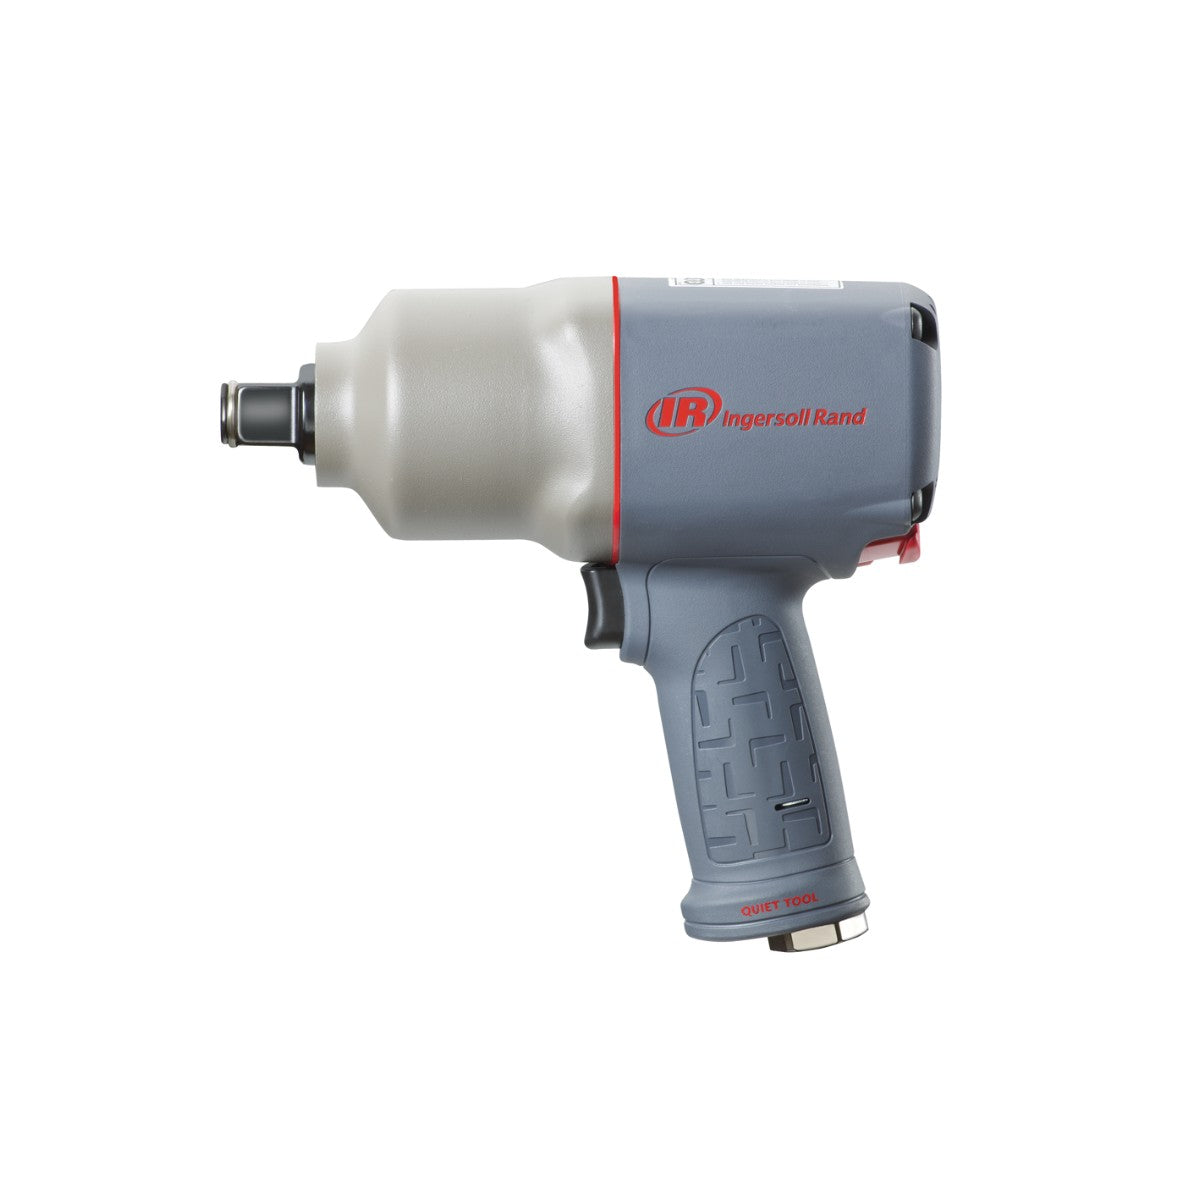 Ingersoll Rand 2145QIMAX- 3/4" Impact Wrench - wise-line-tools